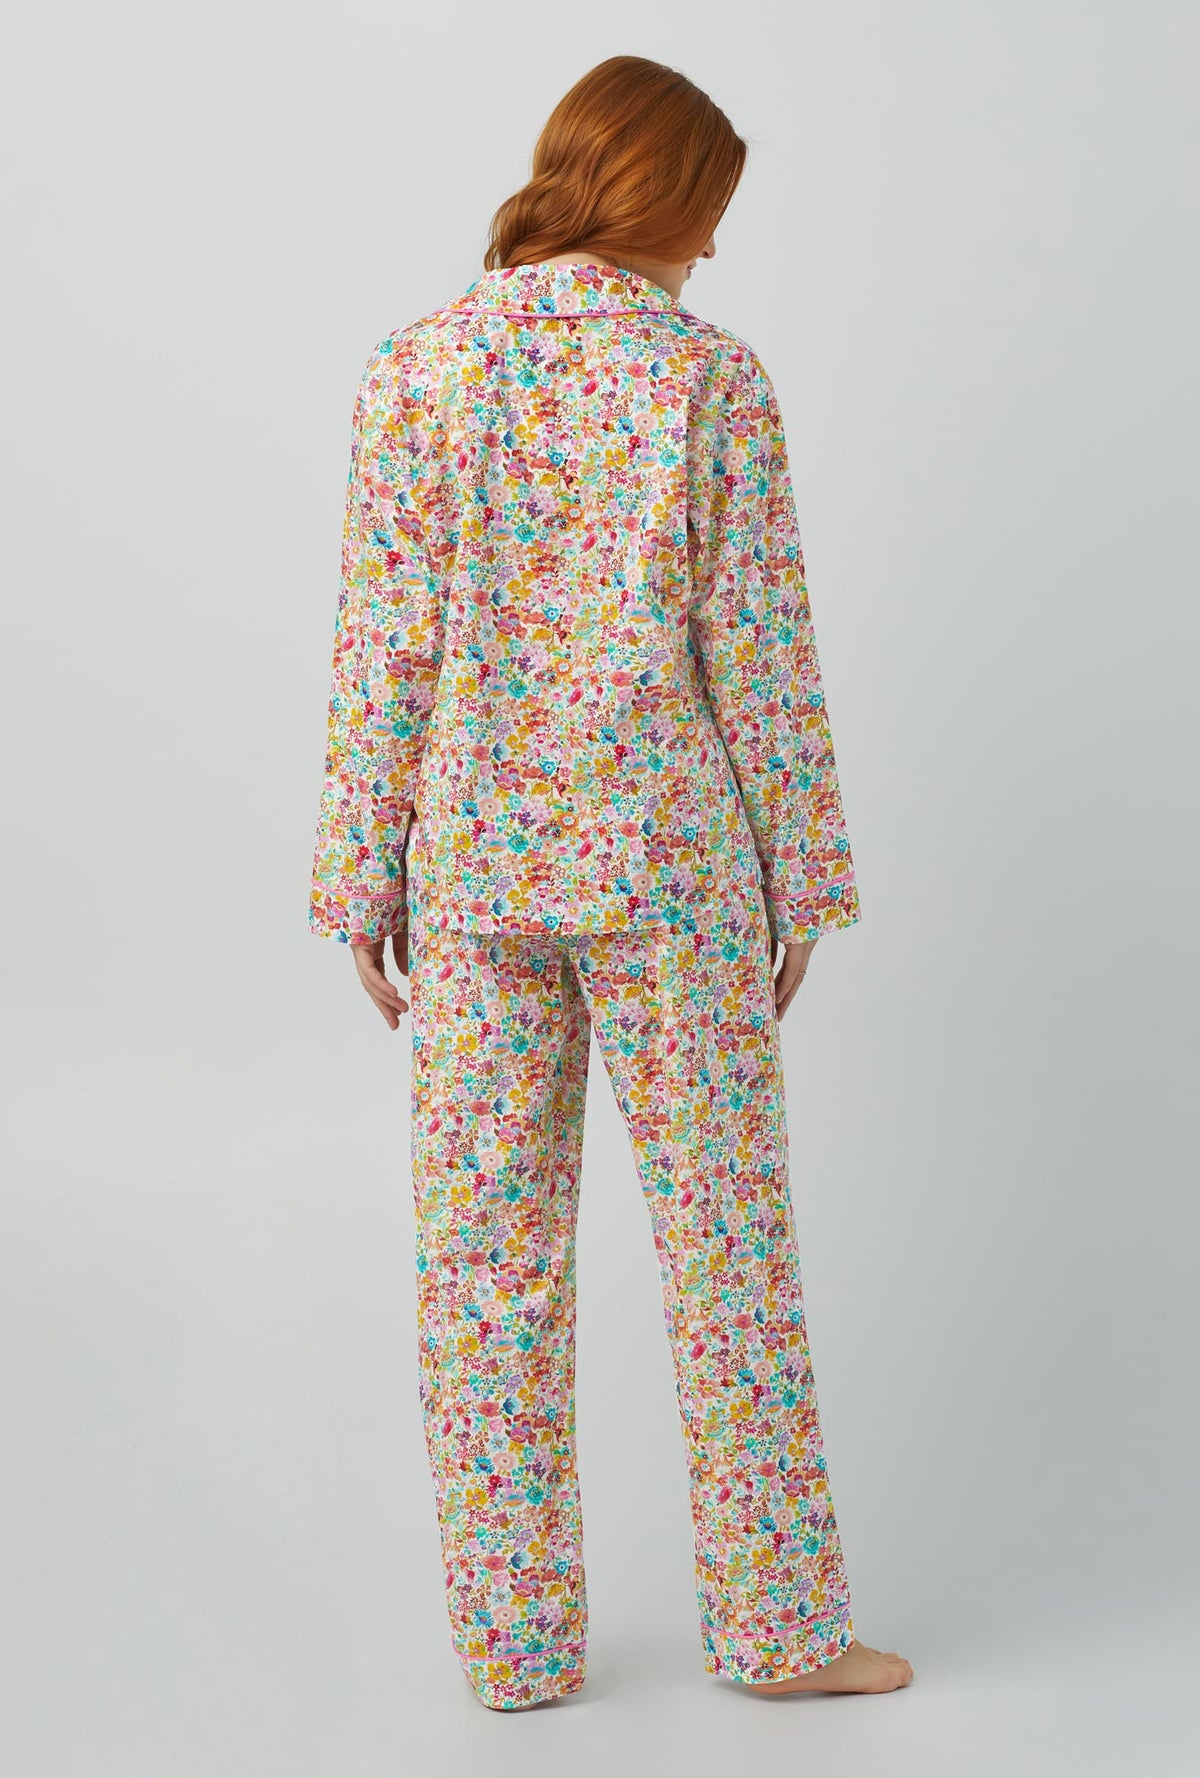 A lady wearing multi color Long Sleeve Classic Woven Cotton PJ Set with Classic Meadow print